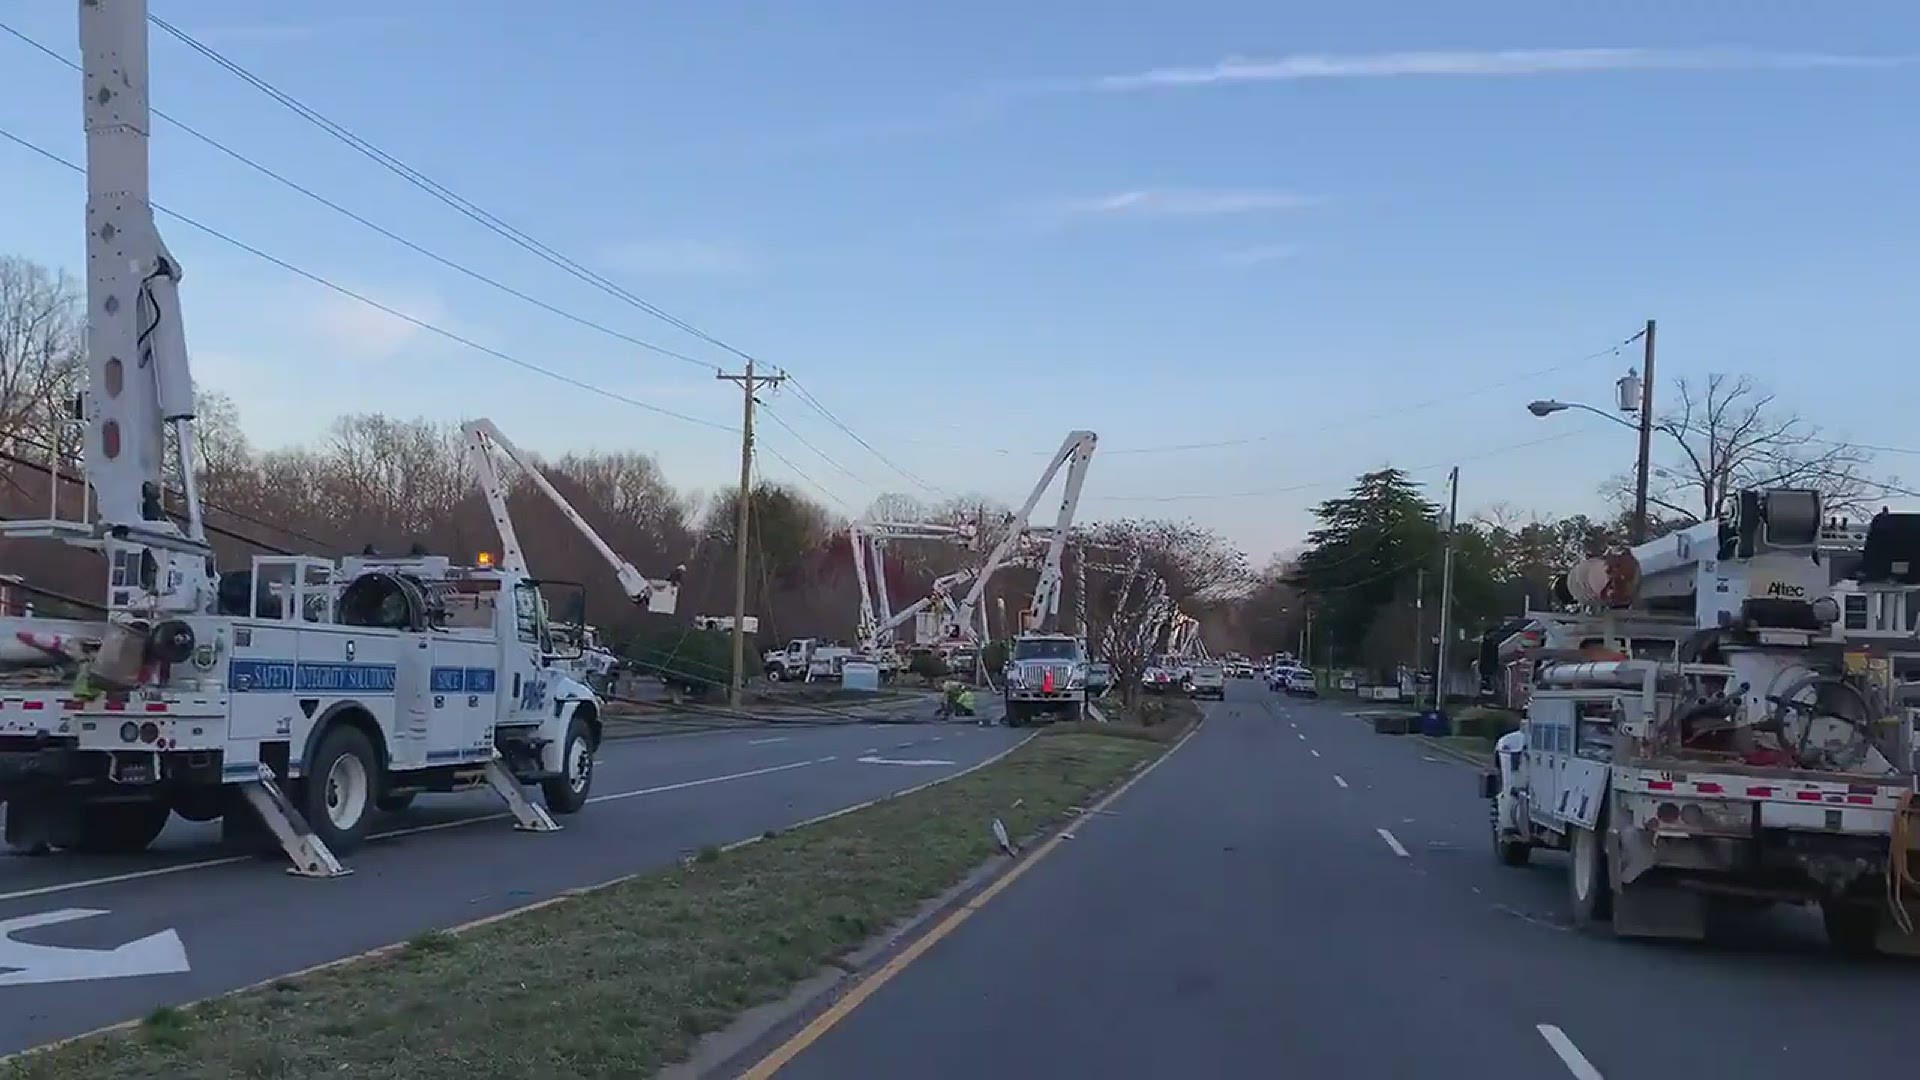 According to city officials, the 2500 block of Reynolda Road is expected to stay closed through noon Saturday.